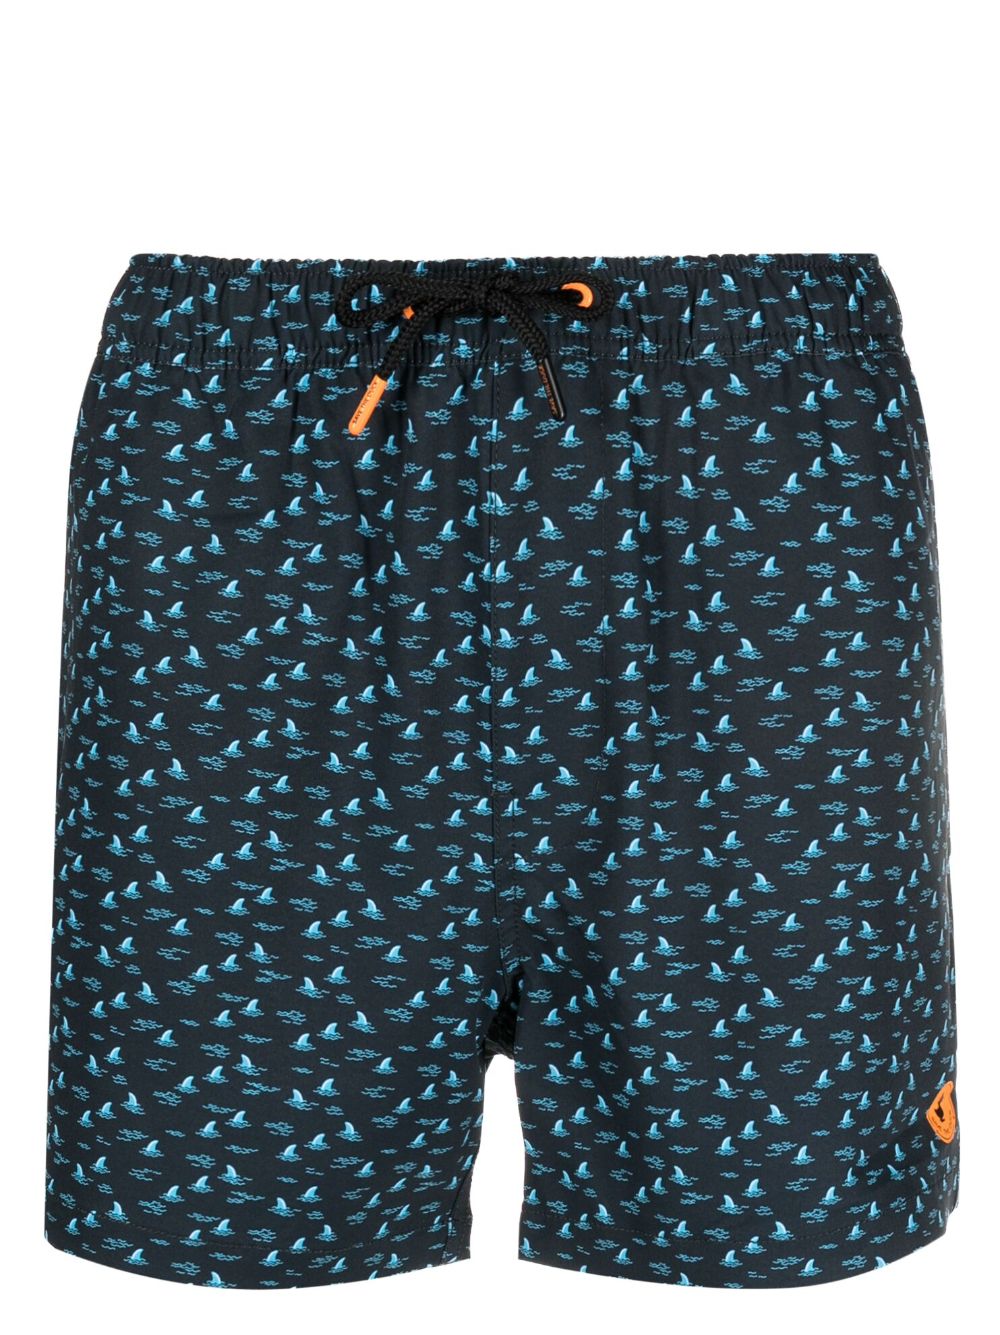 SAVE THE DUCK PRINT COSTUME SHORTS